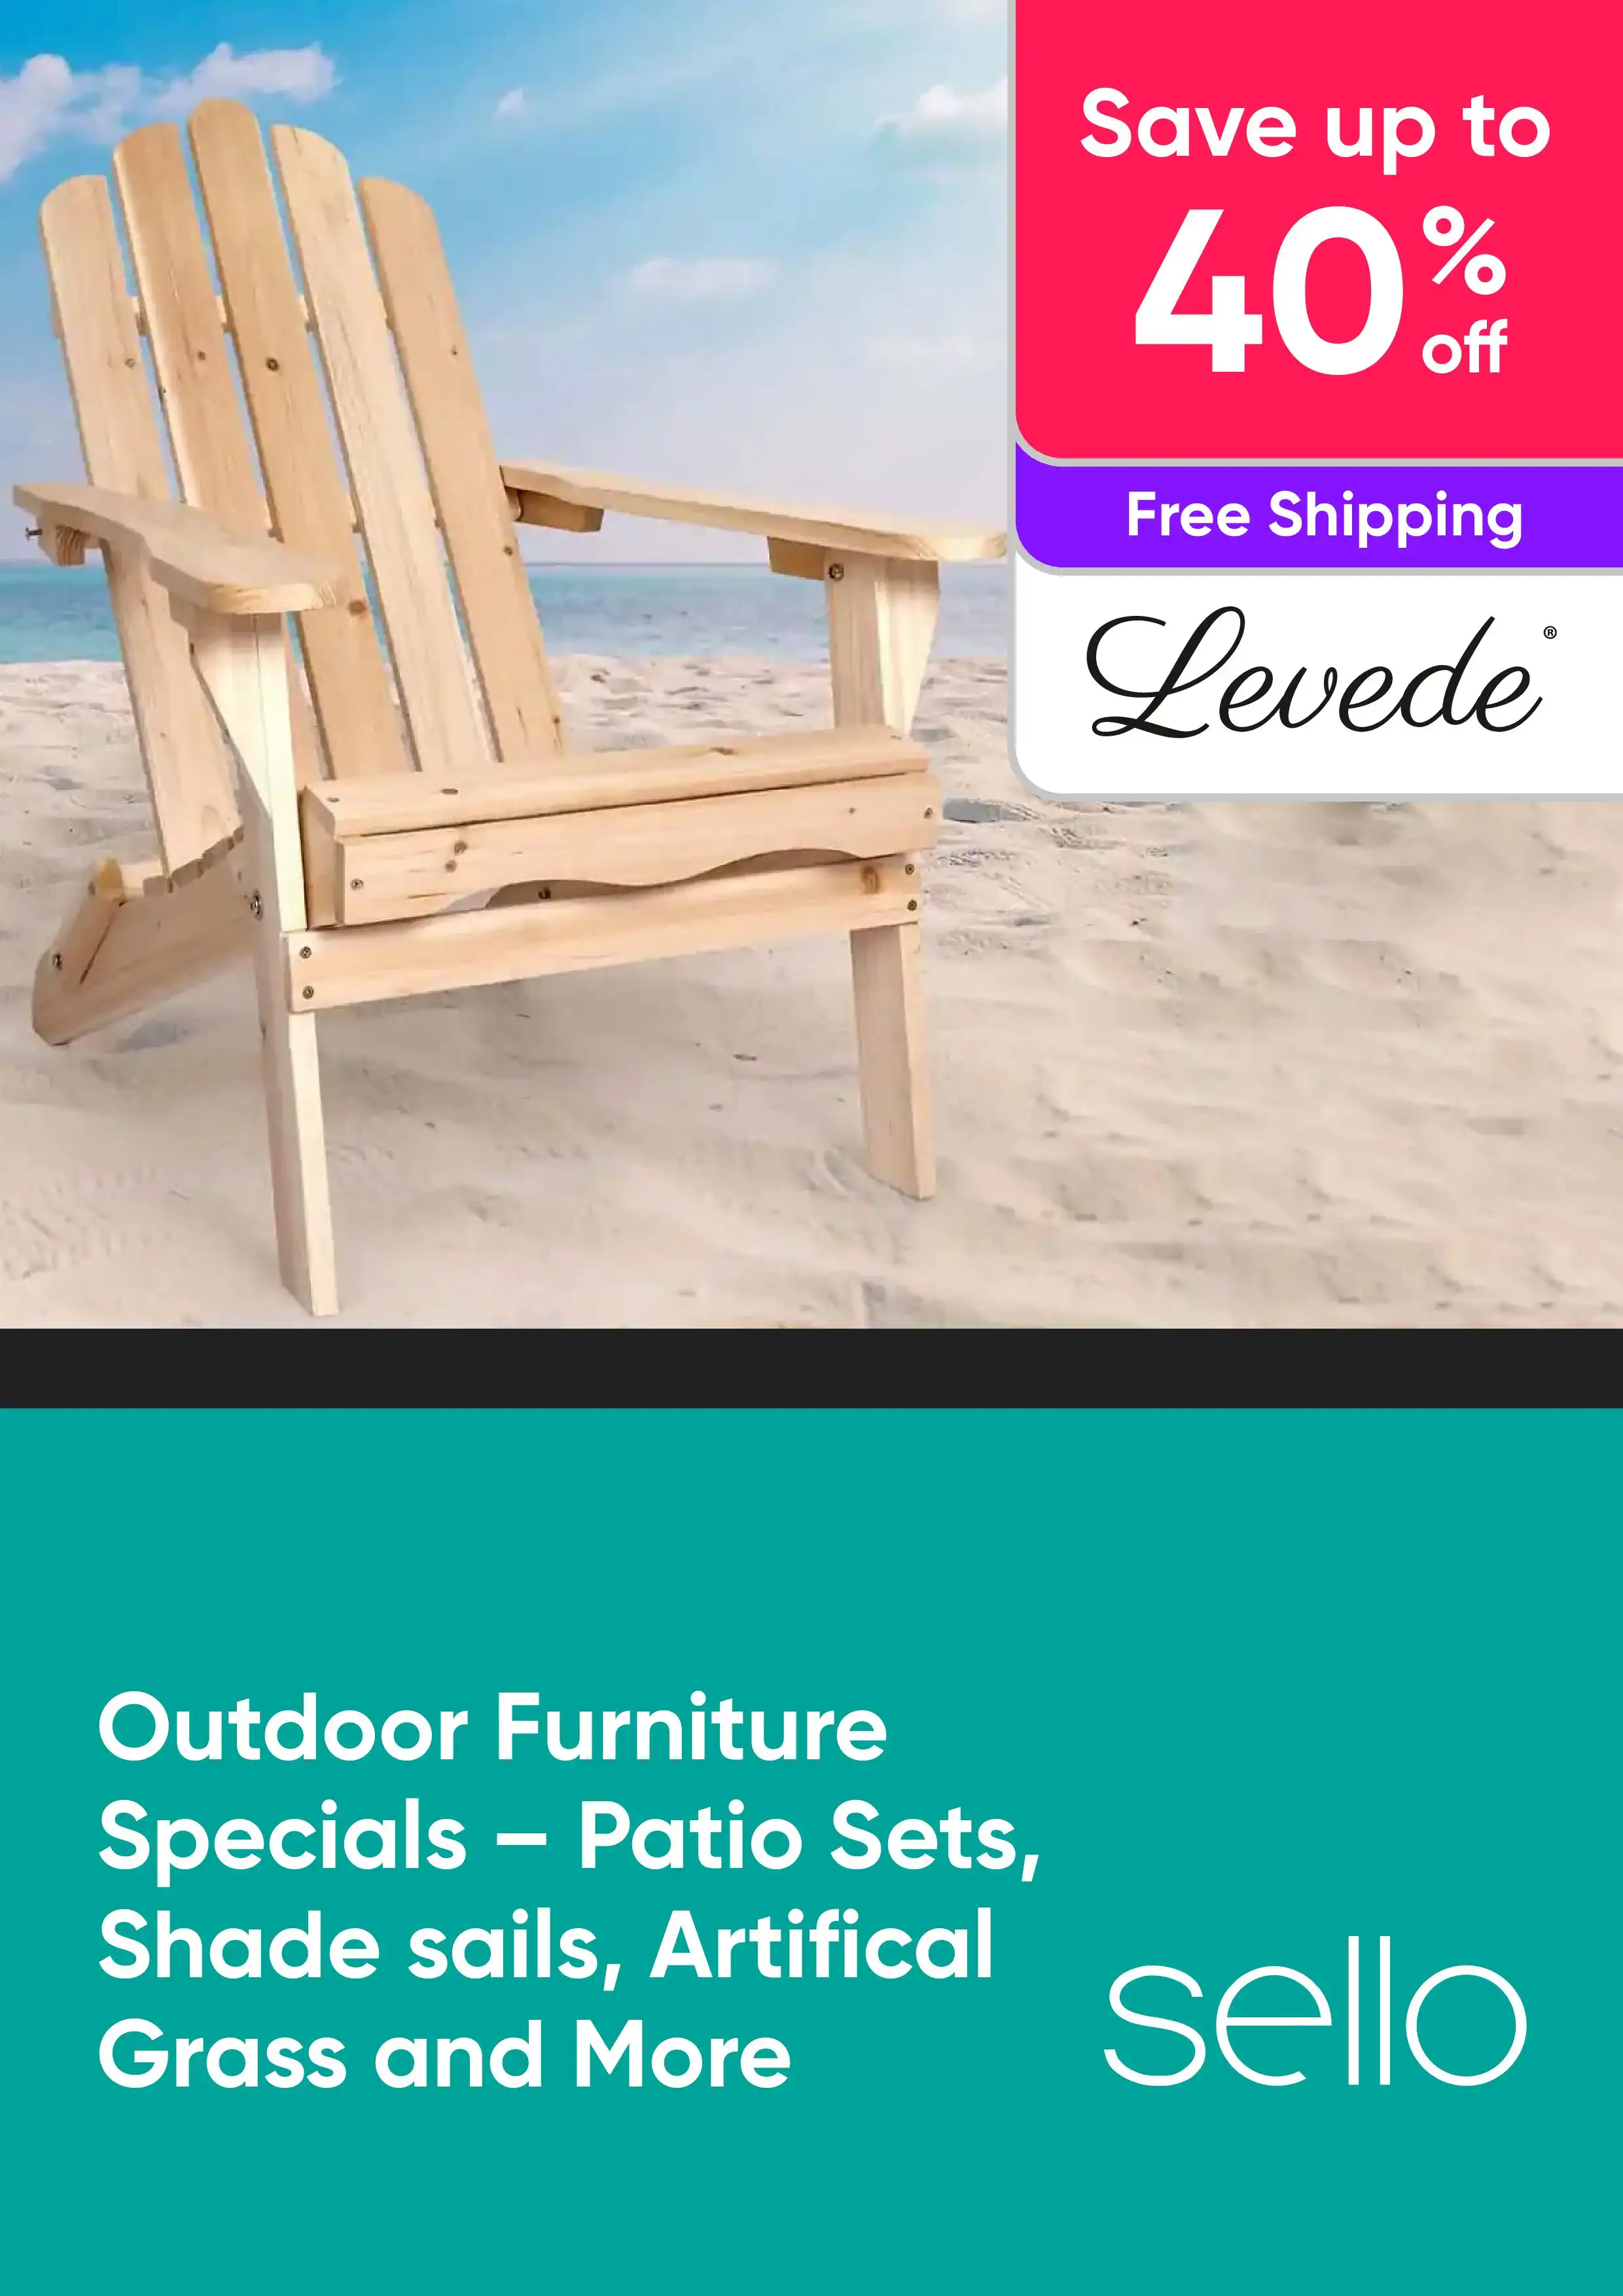 Outdoor Furniture Specials - Patio Sets, Shade Sails and More - Levede - Up to 40% Off